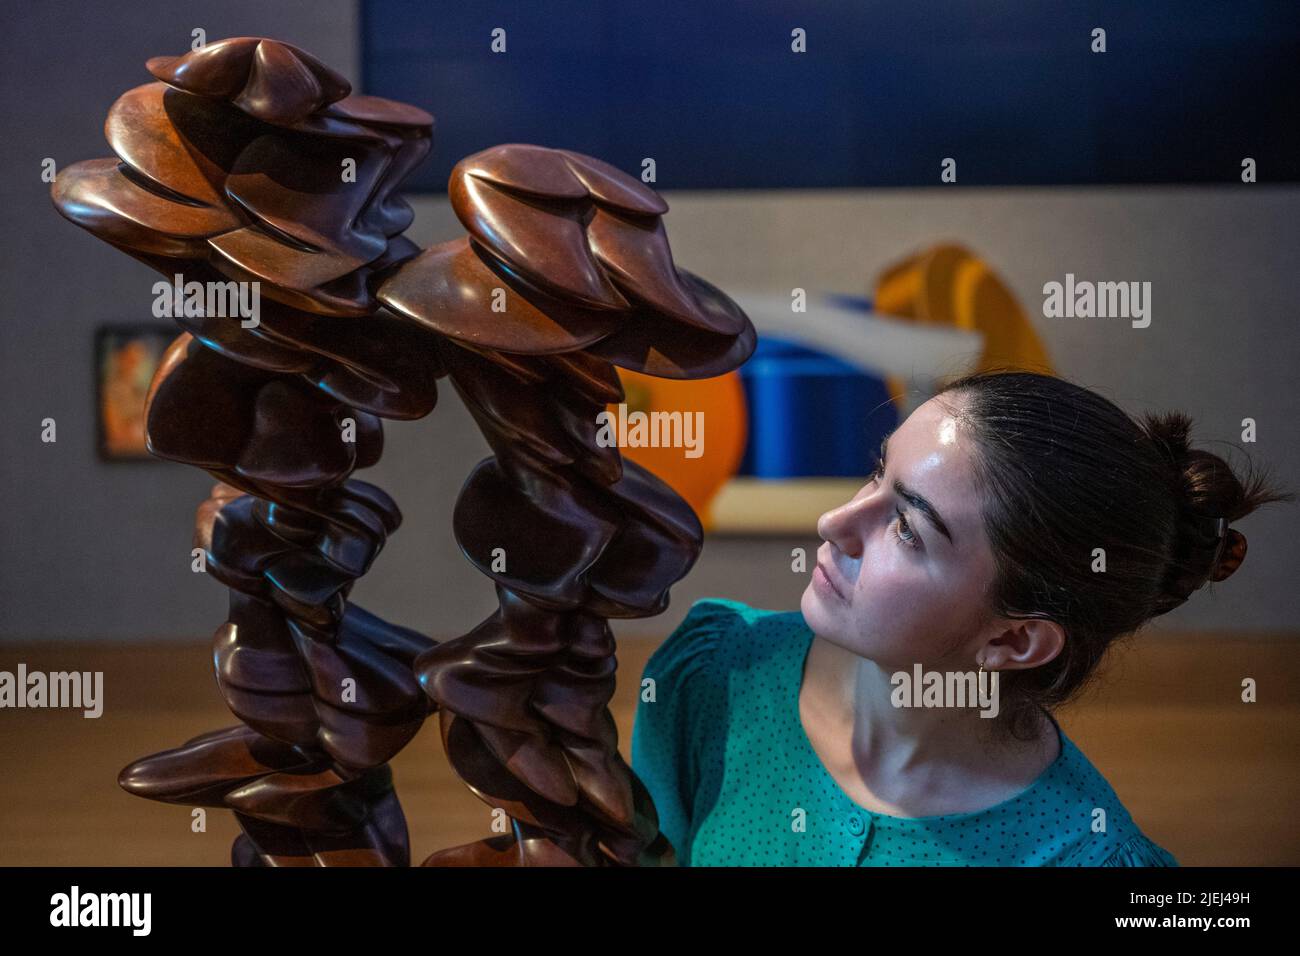 London, UK.  27 June 2022. A staff member views “Pair”, 2018, by Tony Cragg (Est. £80,000 - £120,000) at a preview of Post-War and Contemporary Art sale.  The auction will take place on 30 June at Bonhams New Bond Street galleries.  Credit: Stephen Chung / Alamy Live News Stock Photo